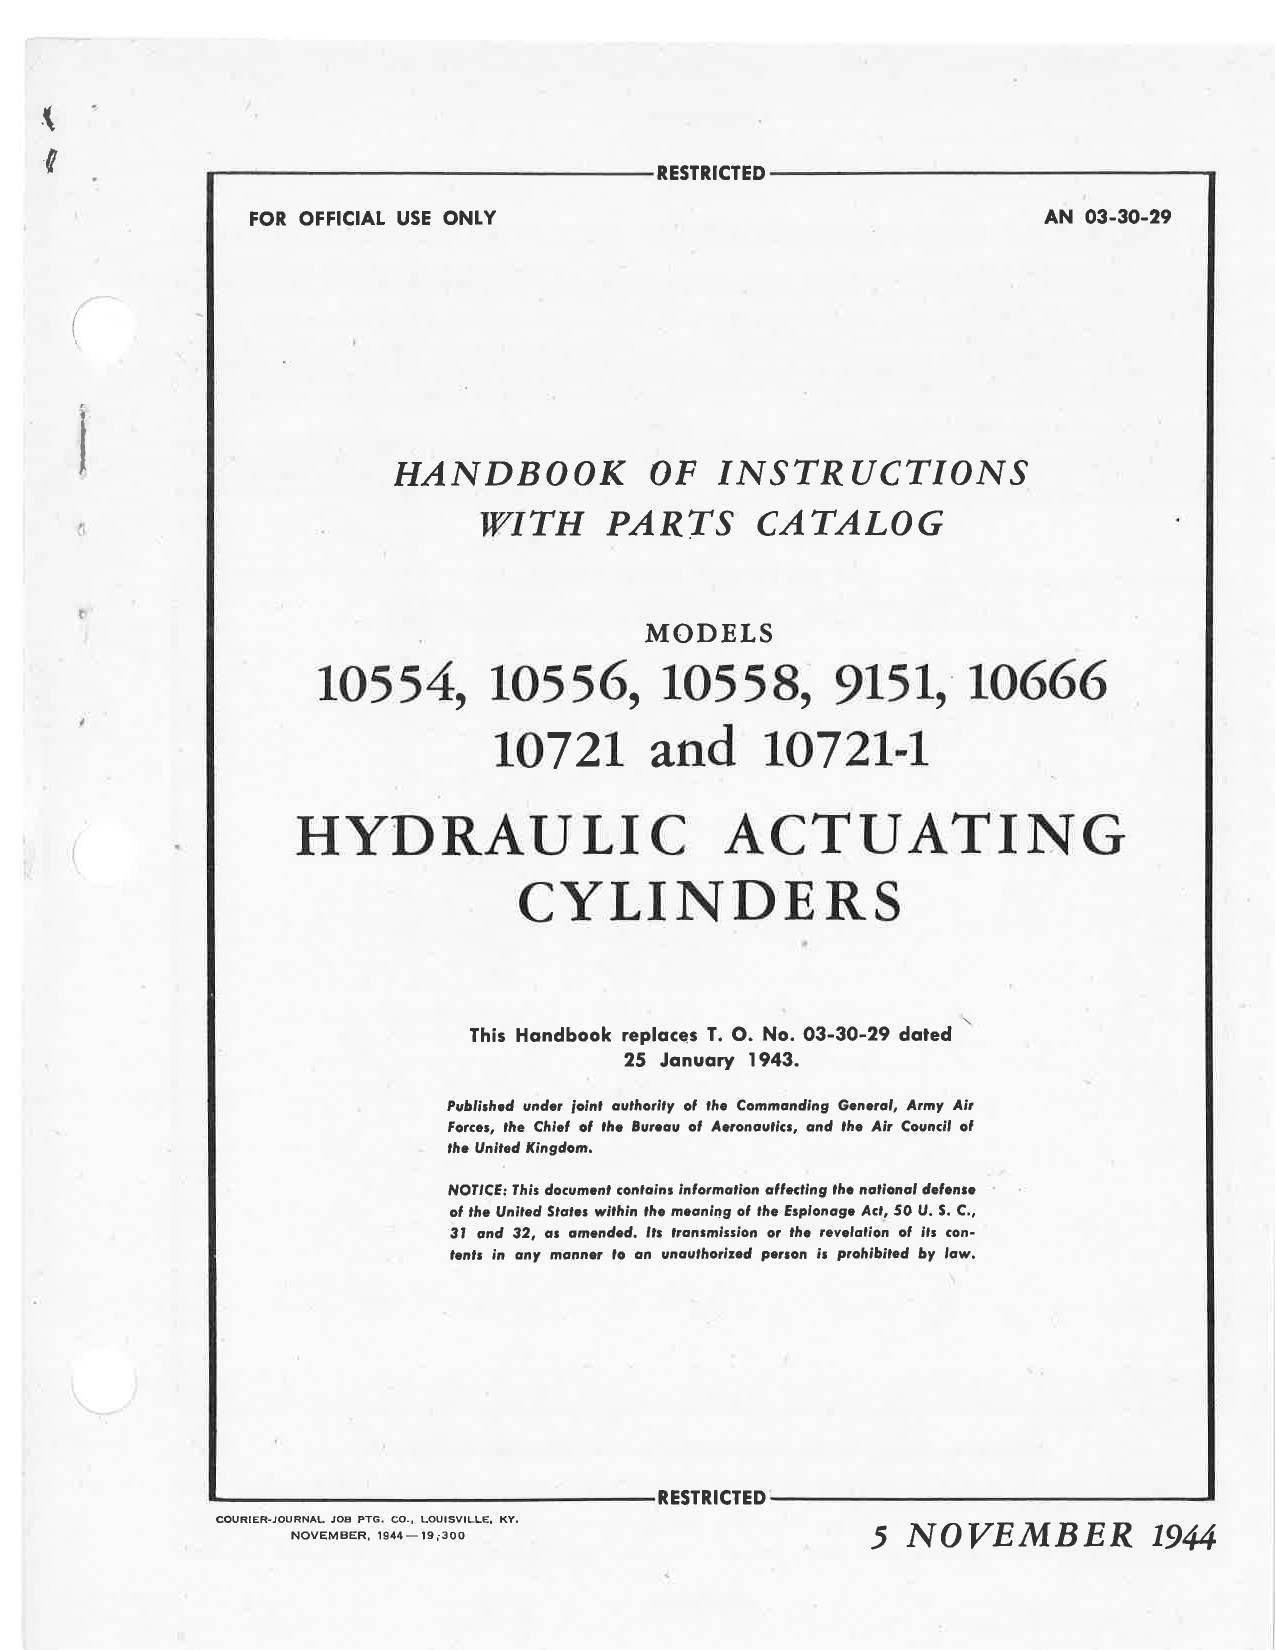 Sample page 7 from AirCorps Library document: Handbook of Instructions with Parts Catalog, Hydraulic Actuating Cylinders